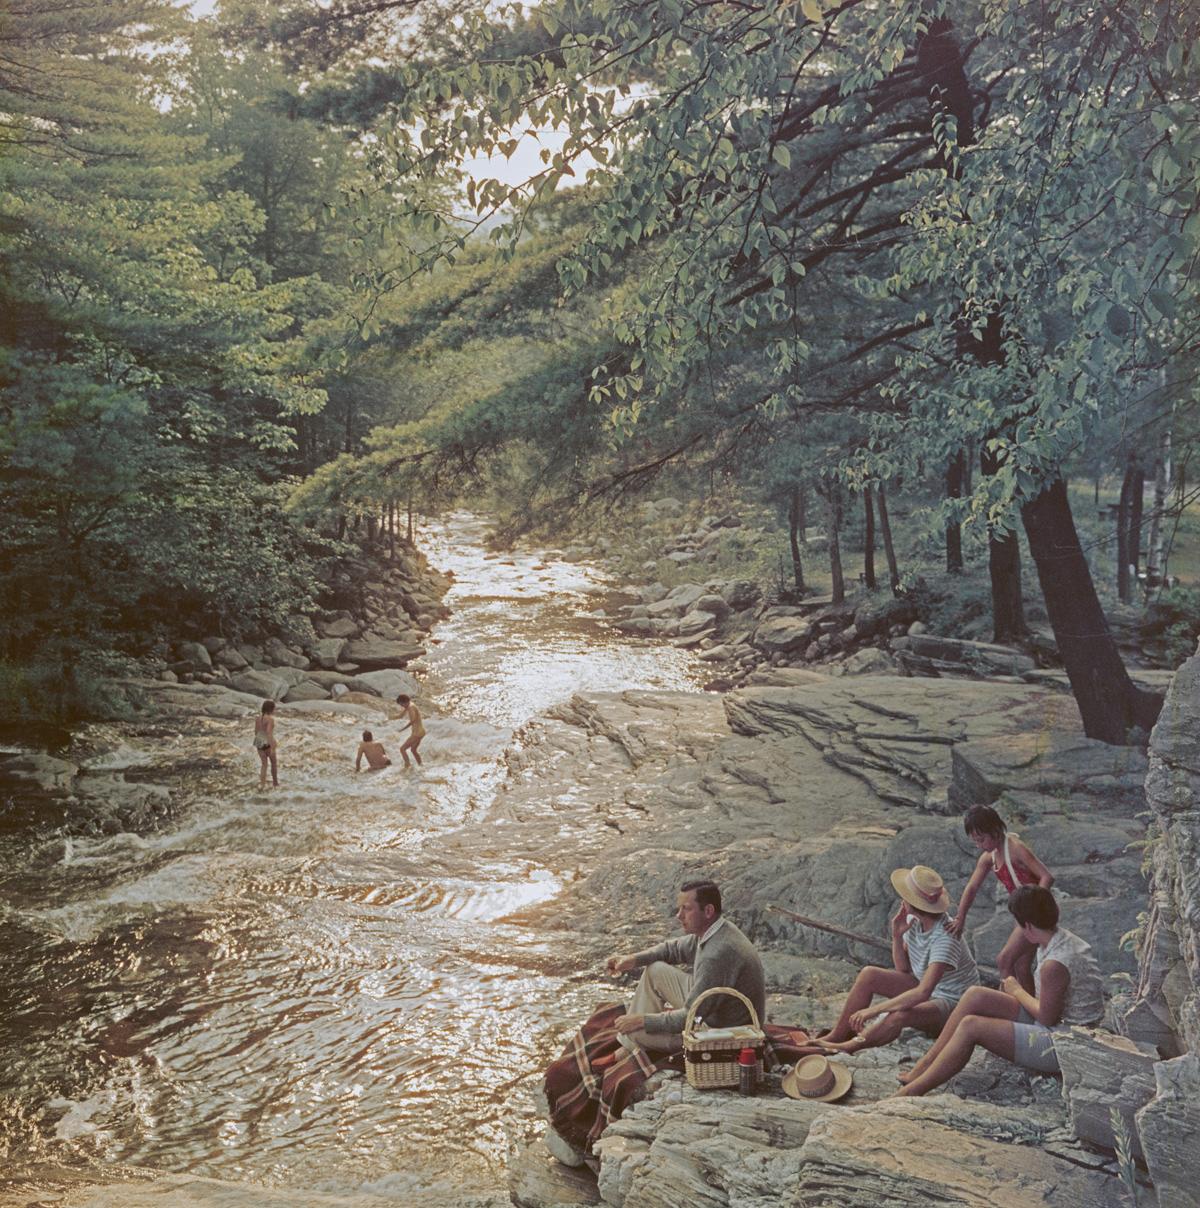  Campbell Falls Picnic - NEW Slim Aarons Estate Edition

A family enjoy a picnic on the bank of the Whiting River near Campbell Falls Massachusetts USA 1959

A gorgeous scene; and a brand NEW Slim Aarons Archive discovery! 

This photograph